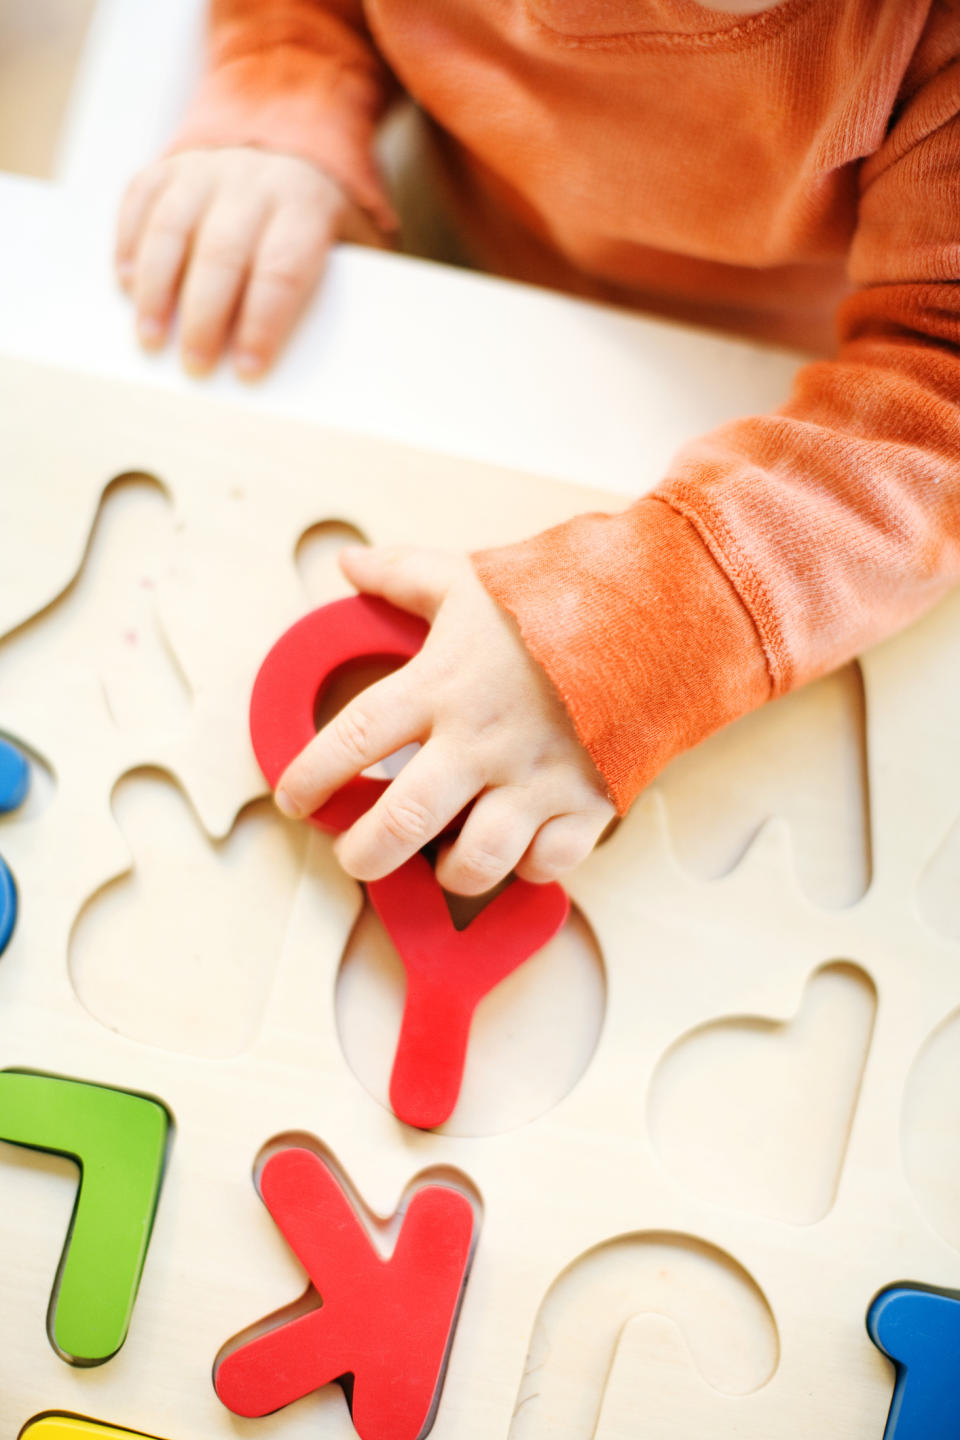 Child's hand solving a wooden puzzle, placing a red piece